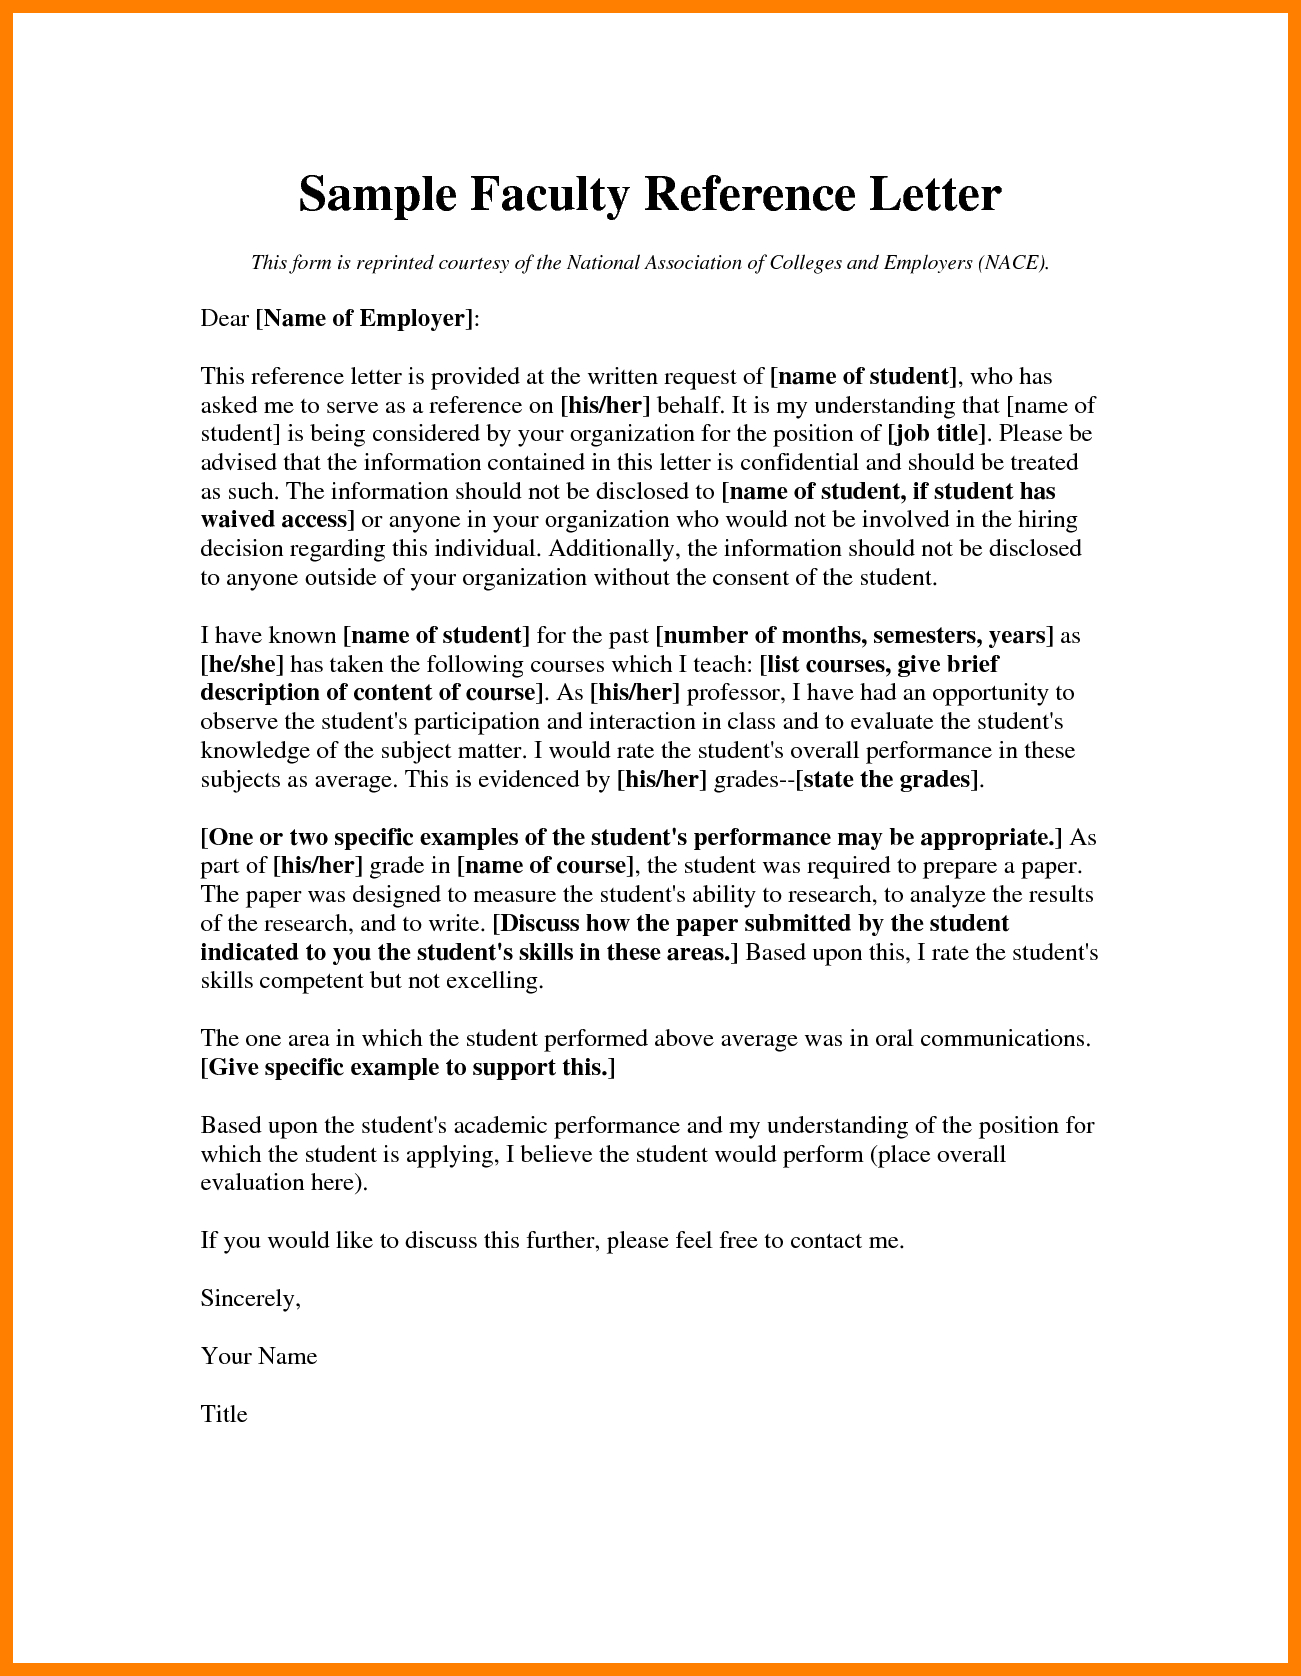 Academic Letter Of Recommendation For Faculty Position intended for size 1301 X 1676